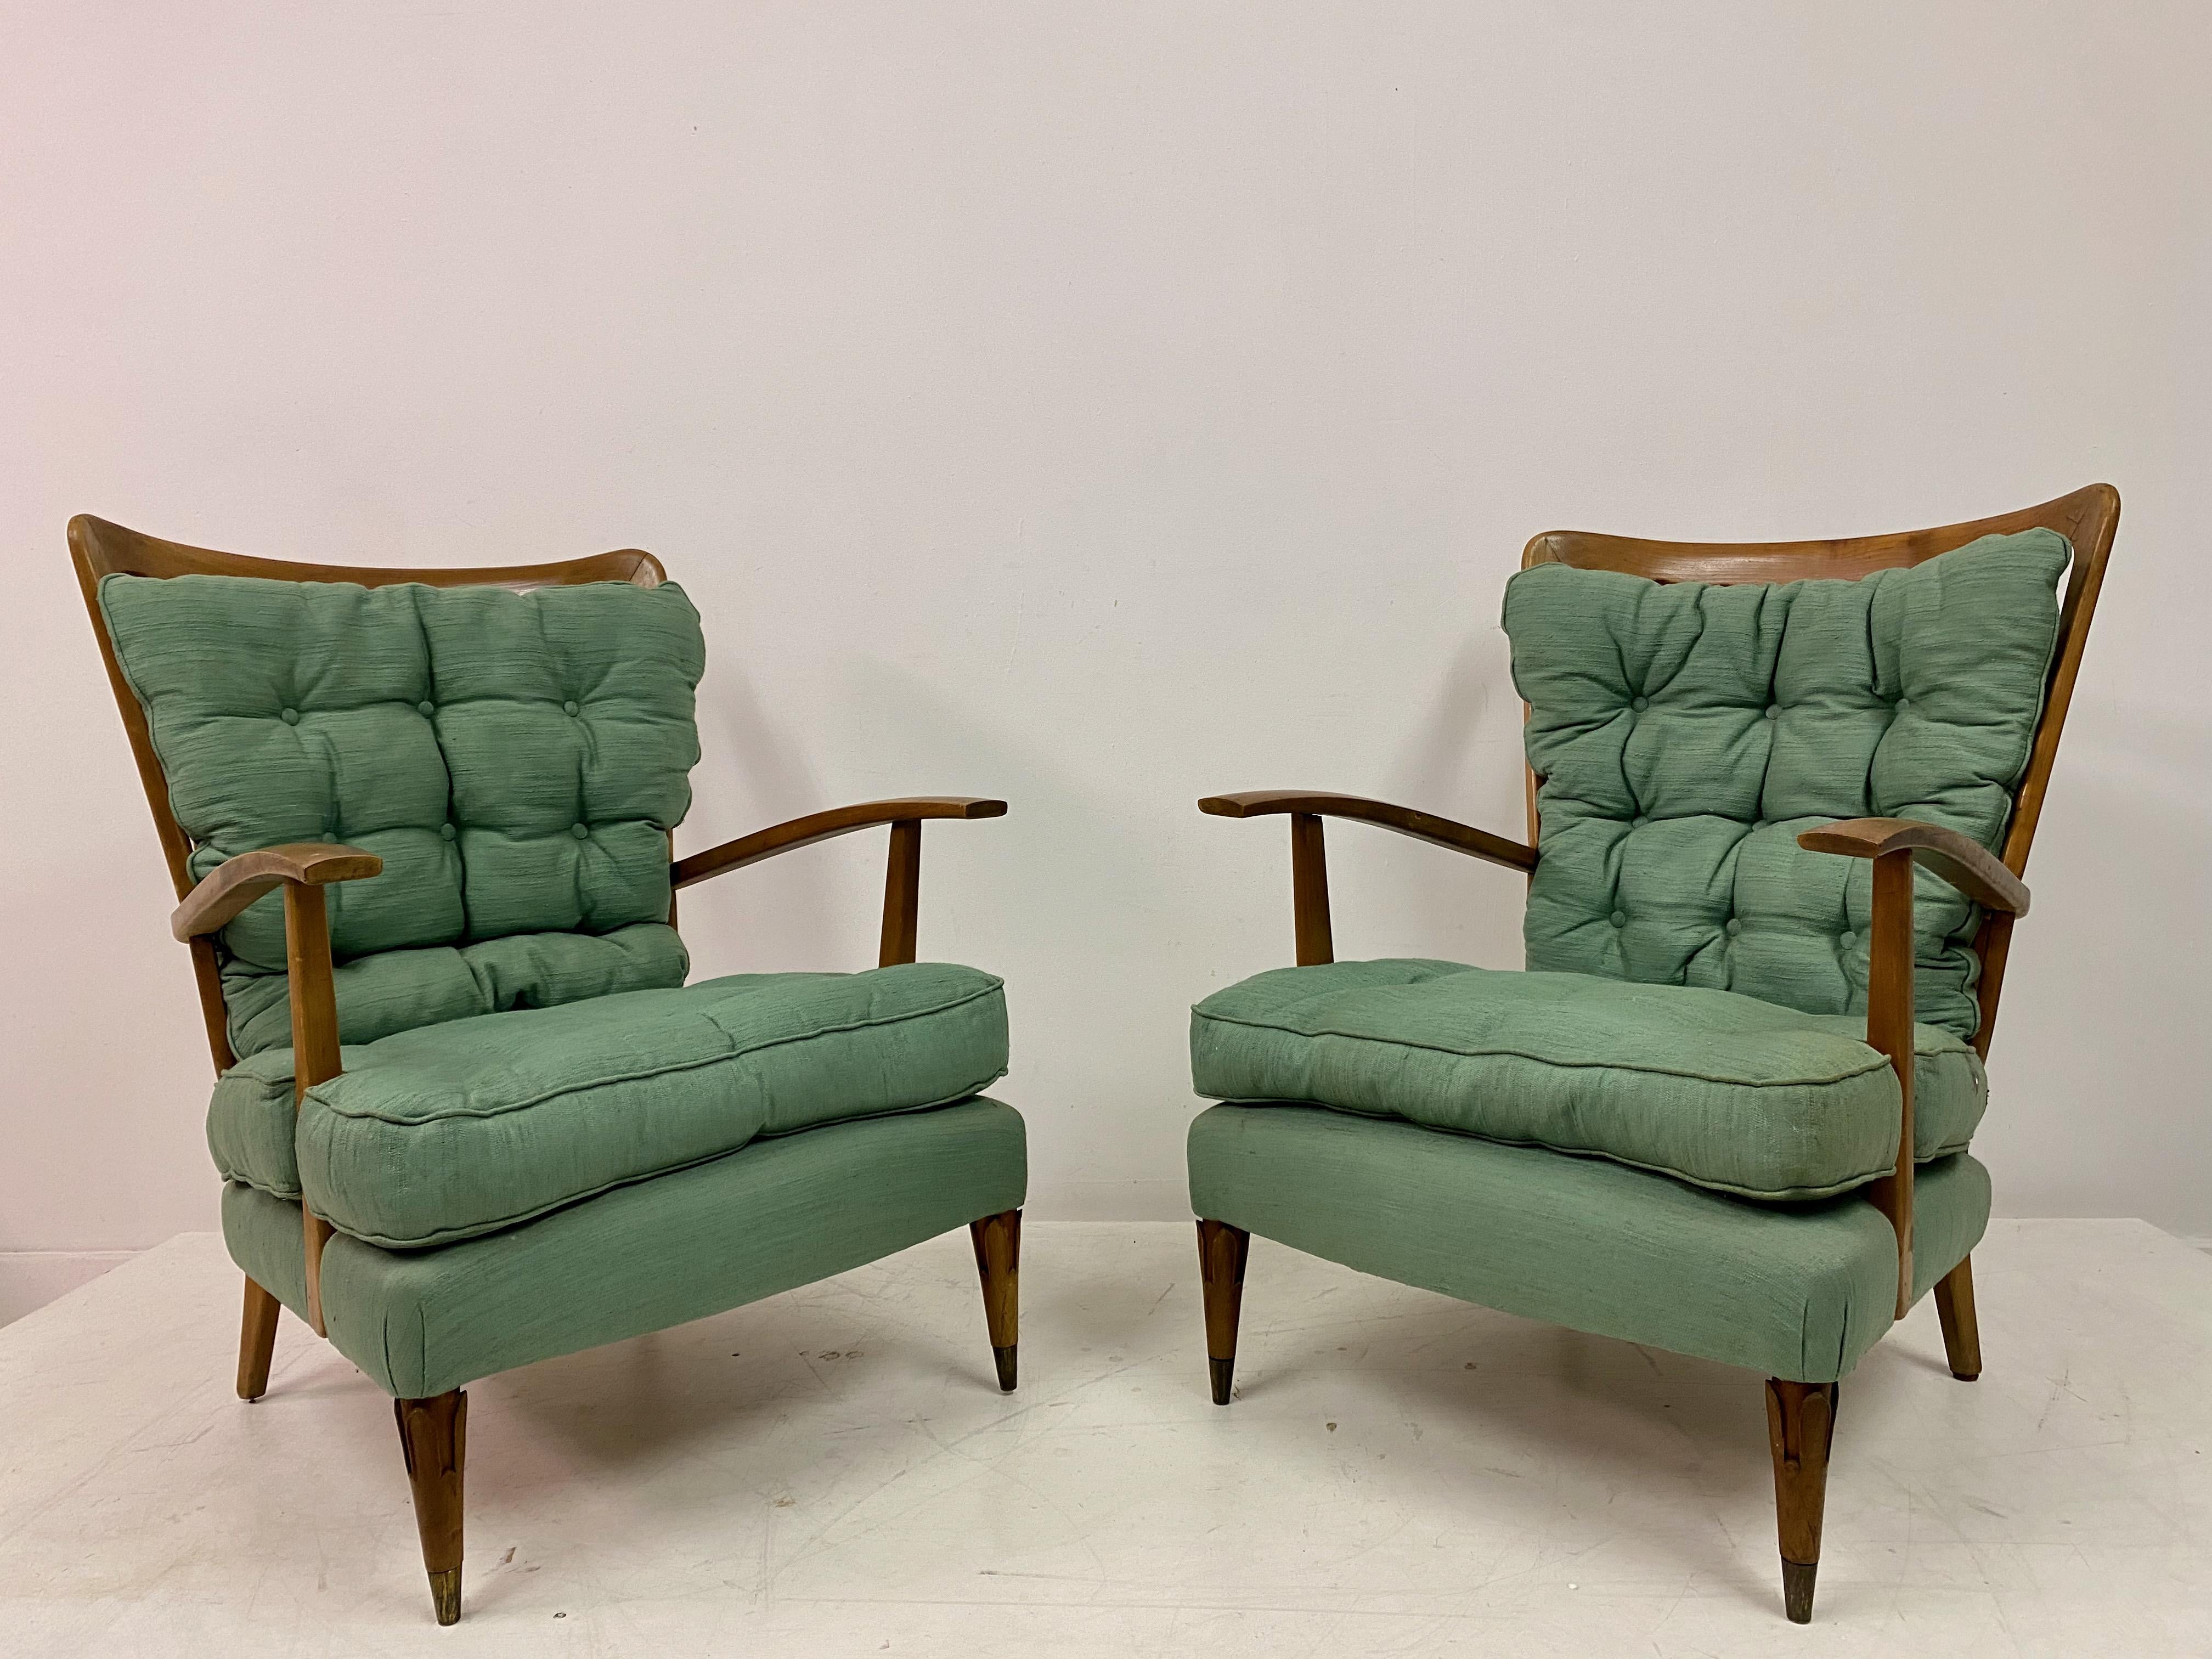 1950s Pair Of Italian Armchairs By Paolo Buffa In Good Condition For Sale In London, London